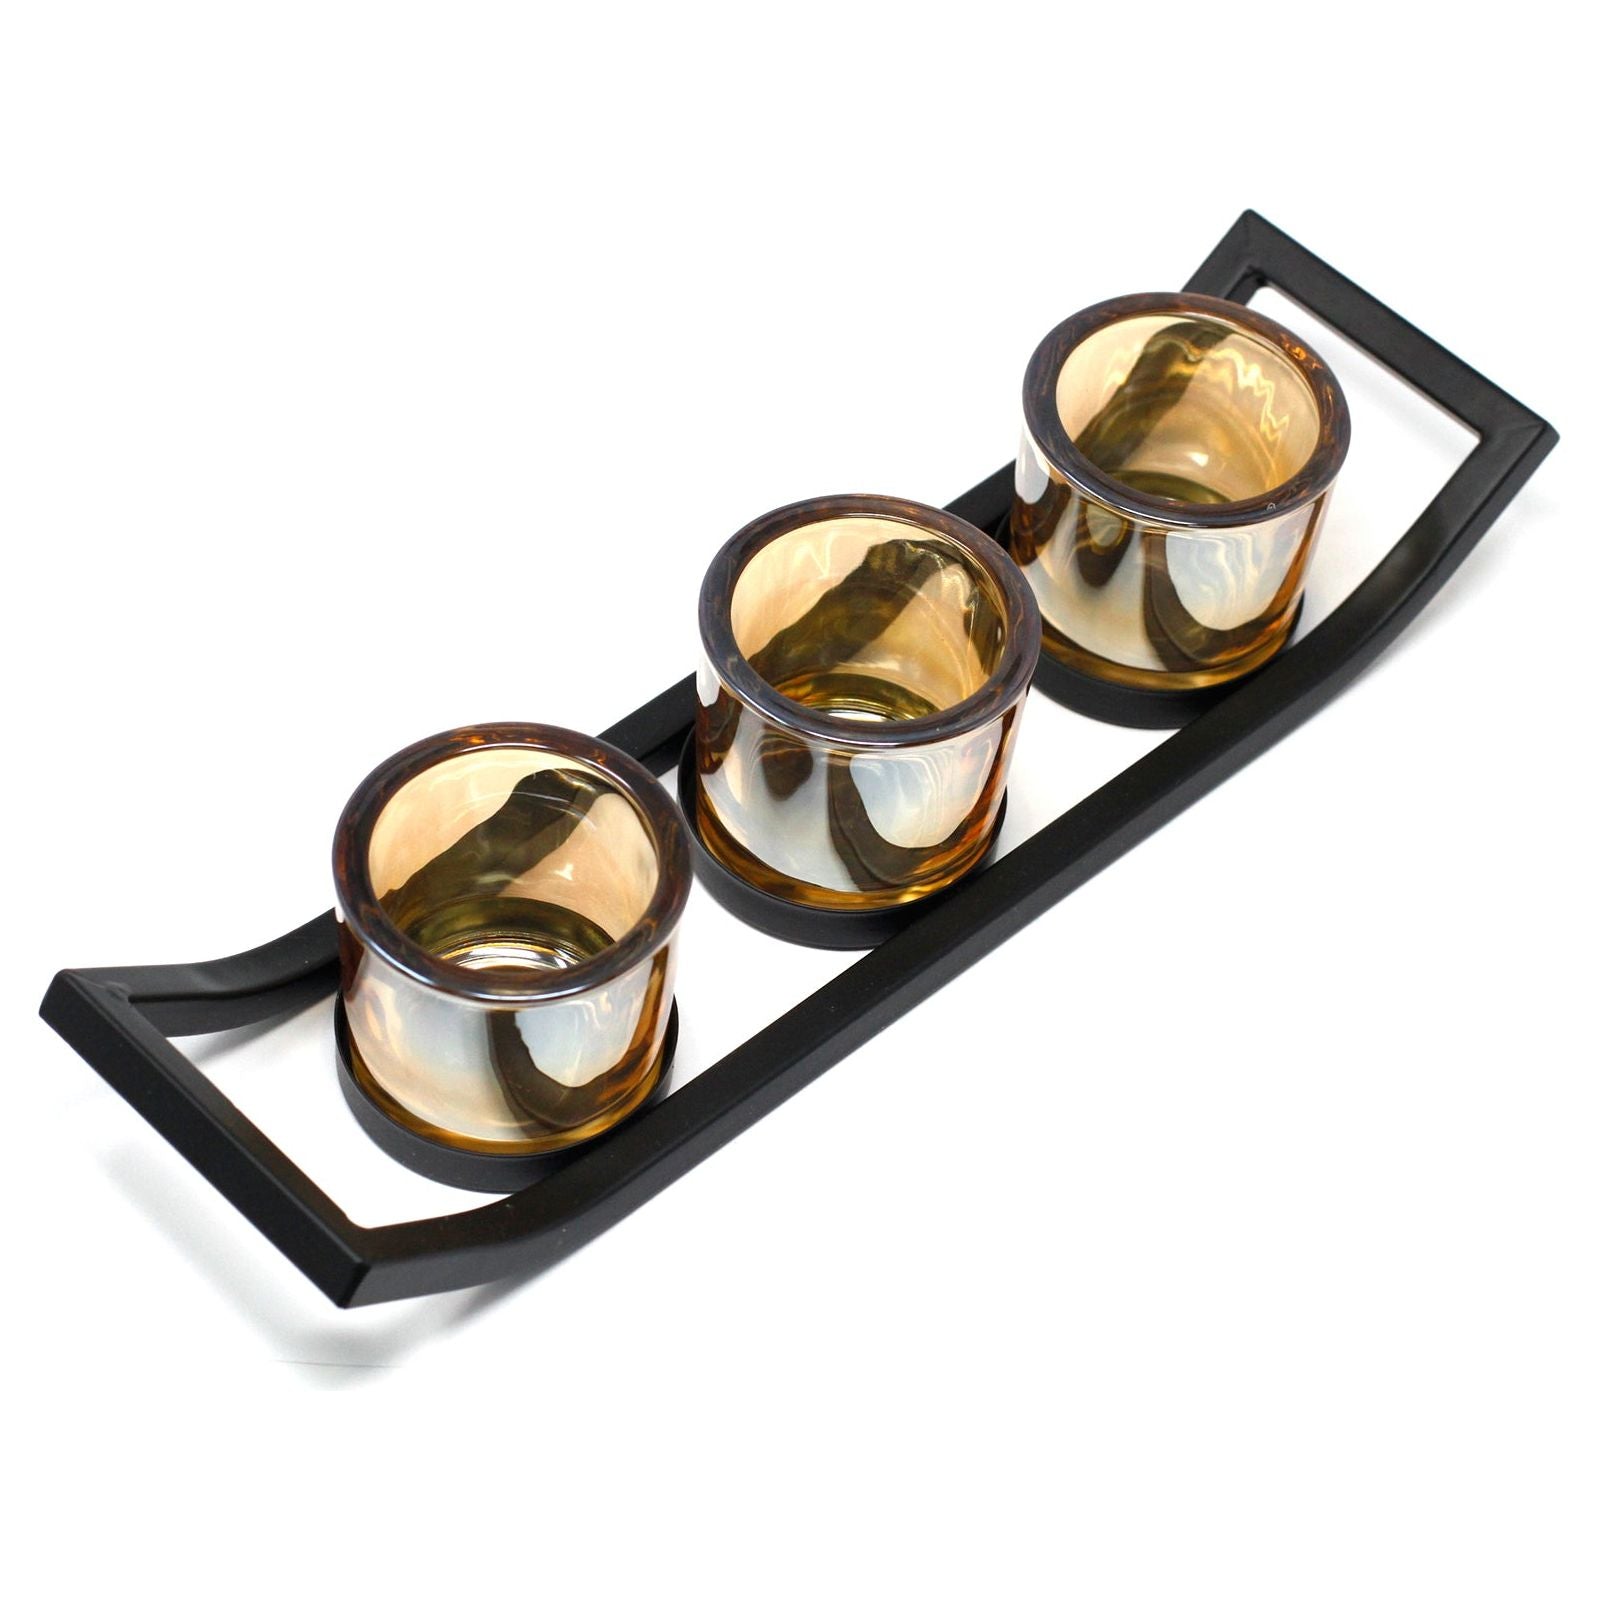 Centrepiece Iron Votive Candle Holder - 3 Cup Ledge - Ashton and Finch